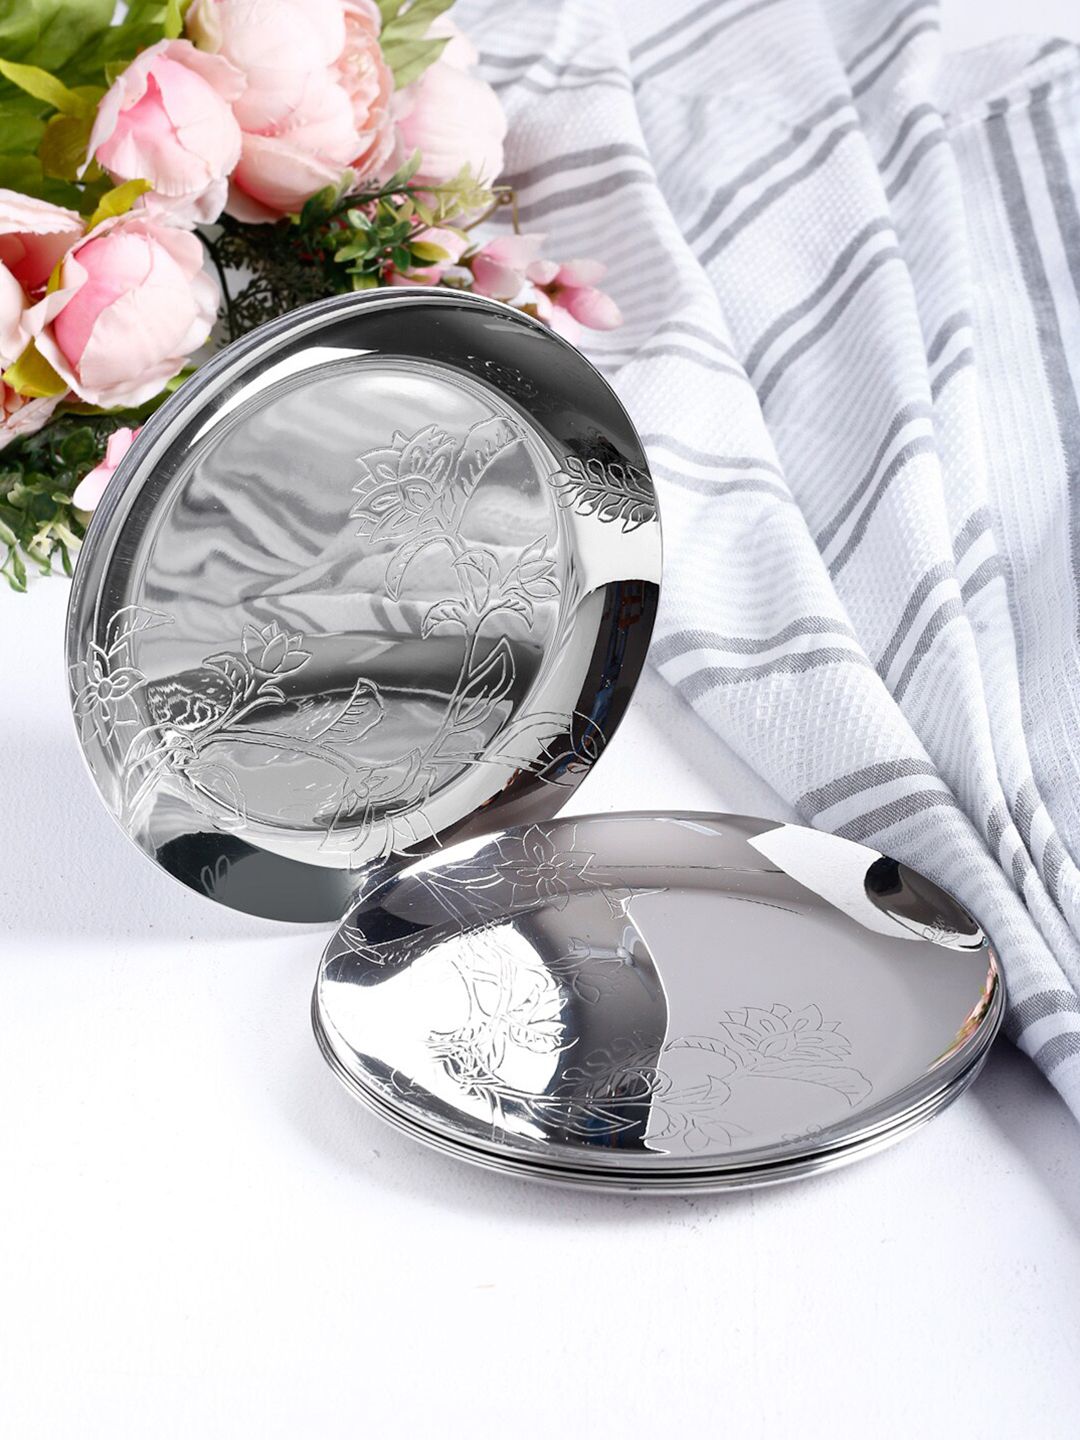 ARTTDINOX Steel-Toned 6 Pieces Stainless Steel Glossy Royal Lapiz Dinner Plates Price in India